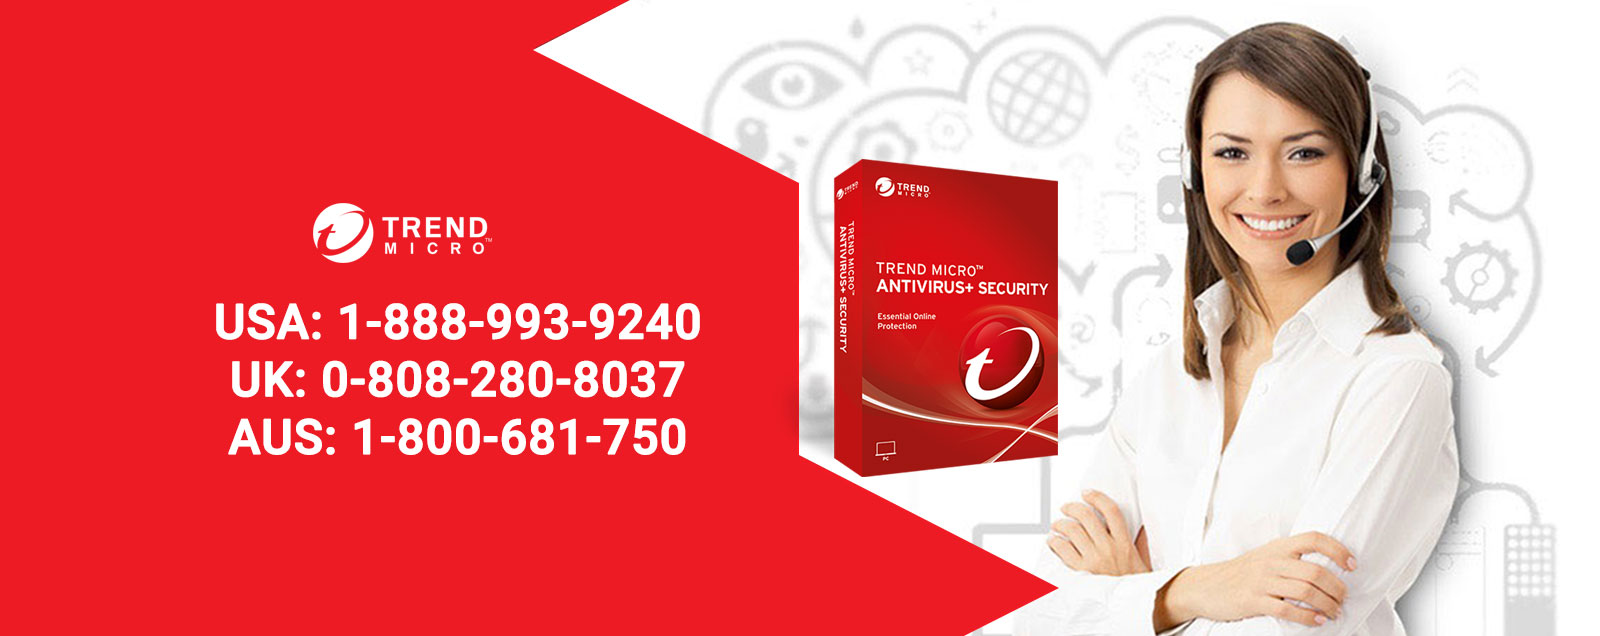 download trend micro with my product key